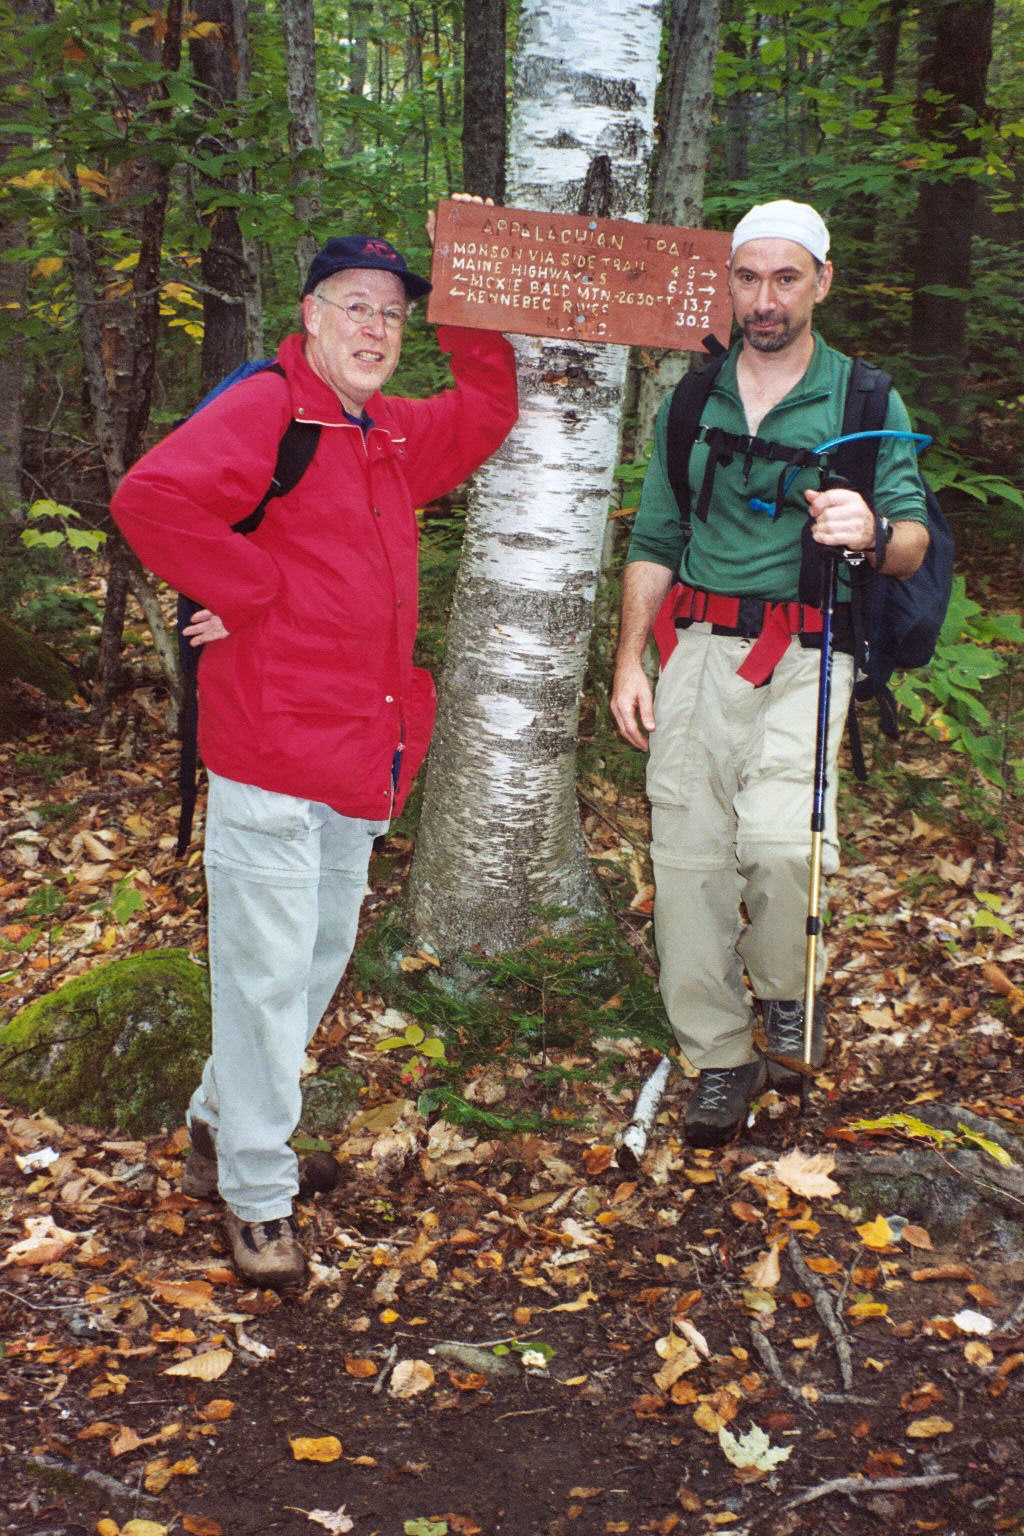 6.3 MM. Here is the trail sign on the AT at the crossing of Shirley-Blanchard Road. Aaron and David Kahan are posing for this photo.  Courtesy askus3@optonline.net